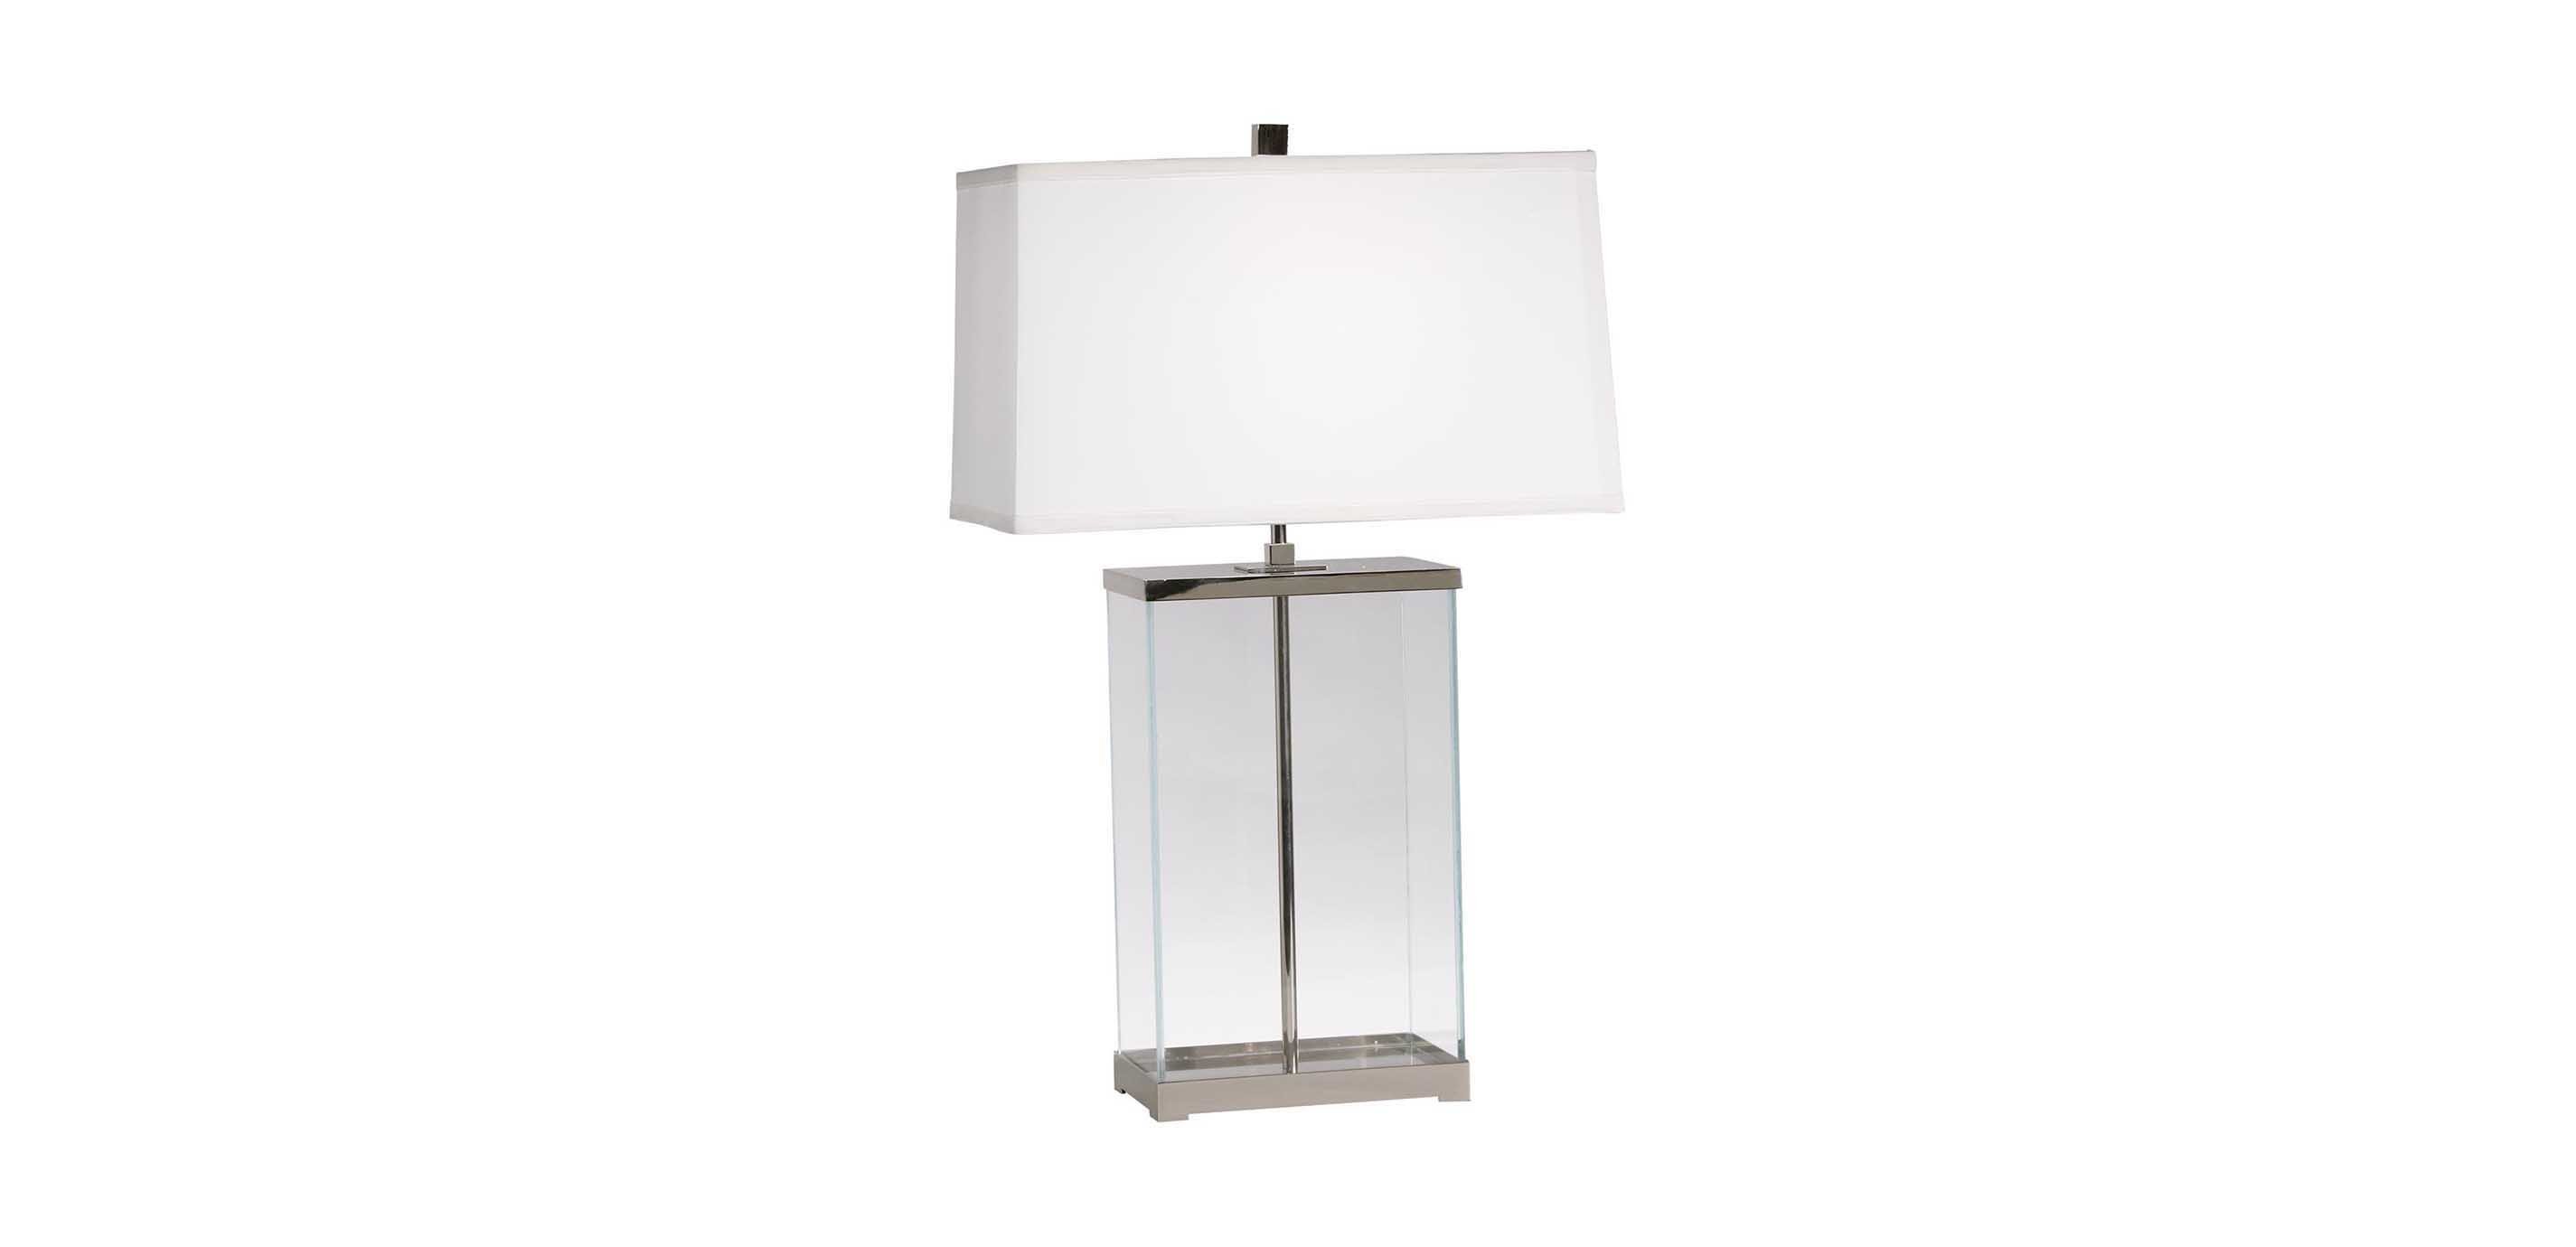 glass table lamp for living room